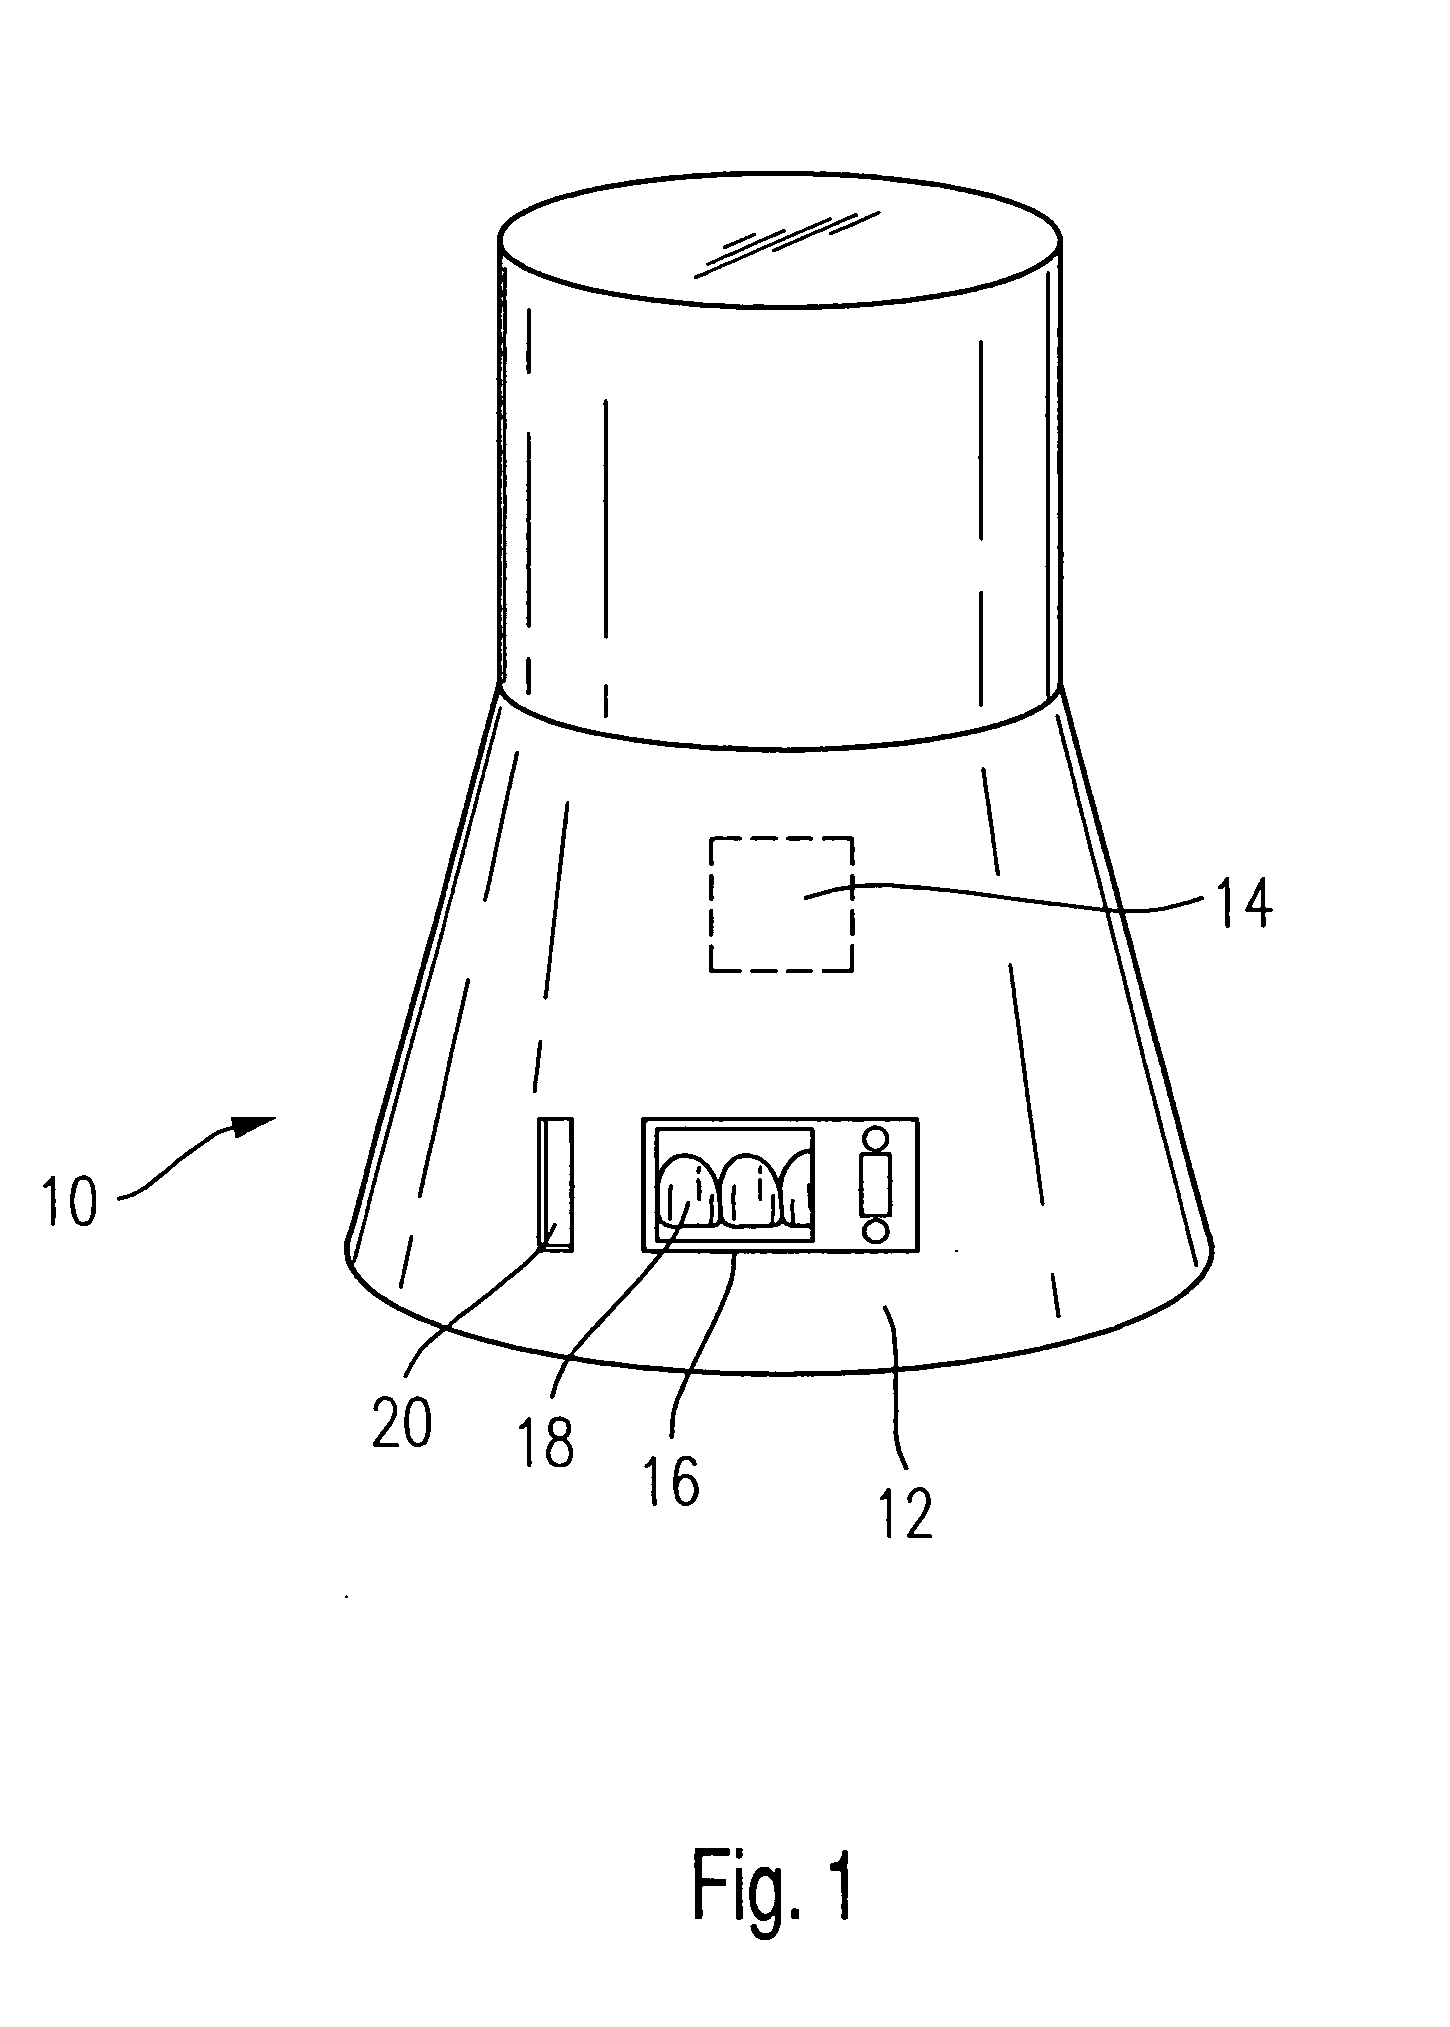 Method and apparatus for using a display associated with a dental kiln